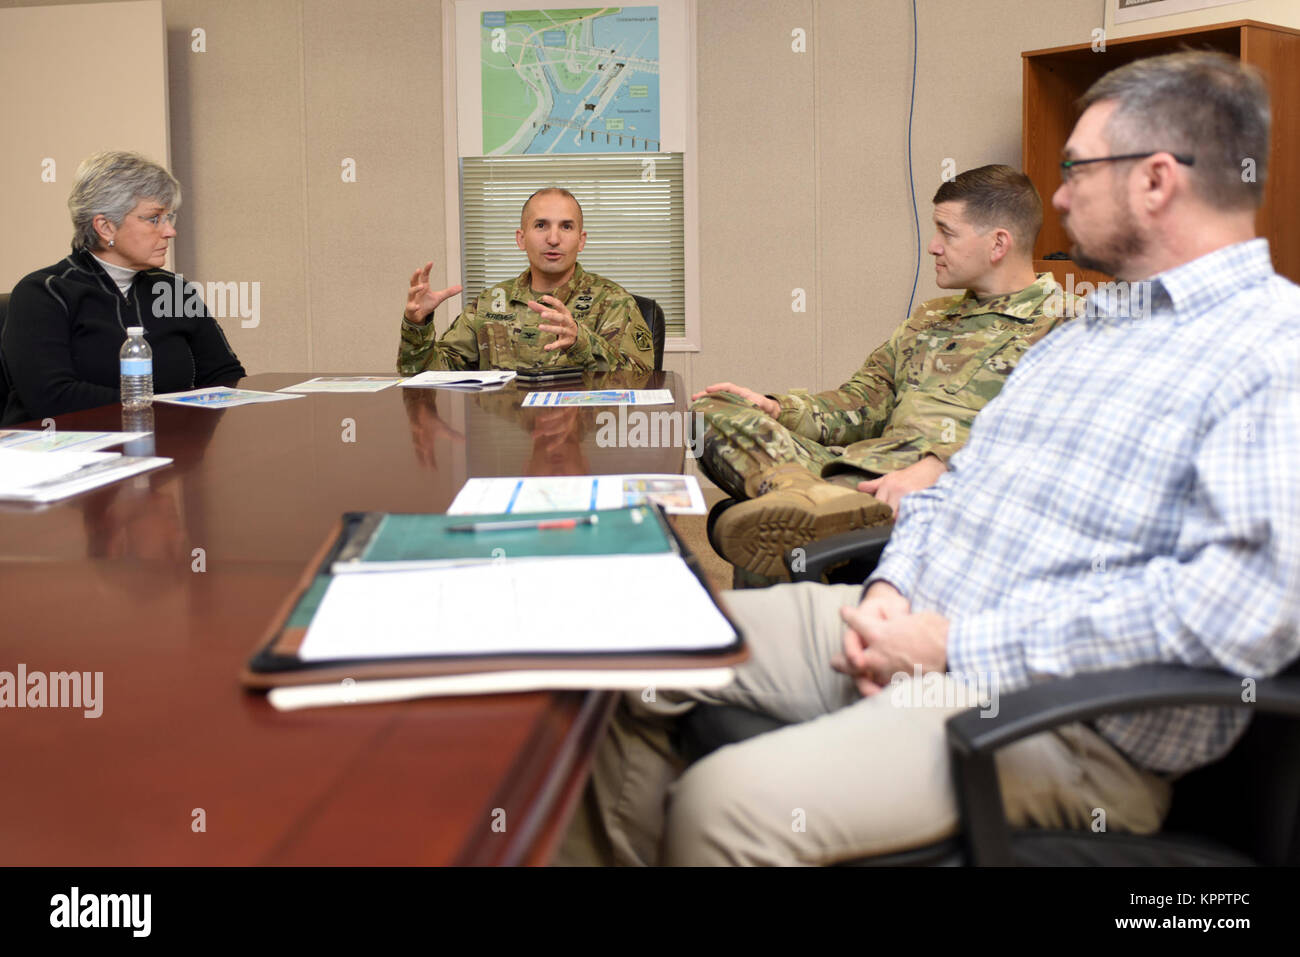 Col. Paul Kremer, U.S. Army Corps of Engineers Great Lakes and Ohio River Division acting commander, meets with Nashville District leadership, engineers and project manager for an update on the Chickamauga Lock Replacement Project.  The colonel met with the team Dec. 5, 2017 at the resident engineer office at Chickamauga Lock at Tennessee River mile 471 in Chattanooga, Tenn. (USACE Stock Photo